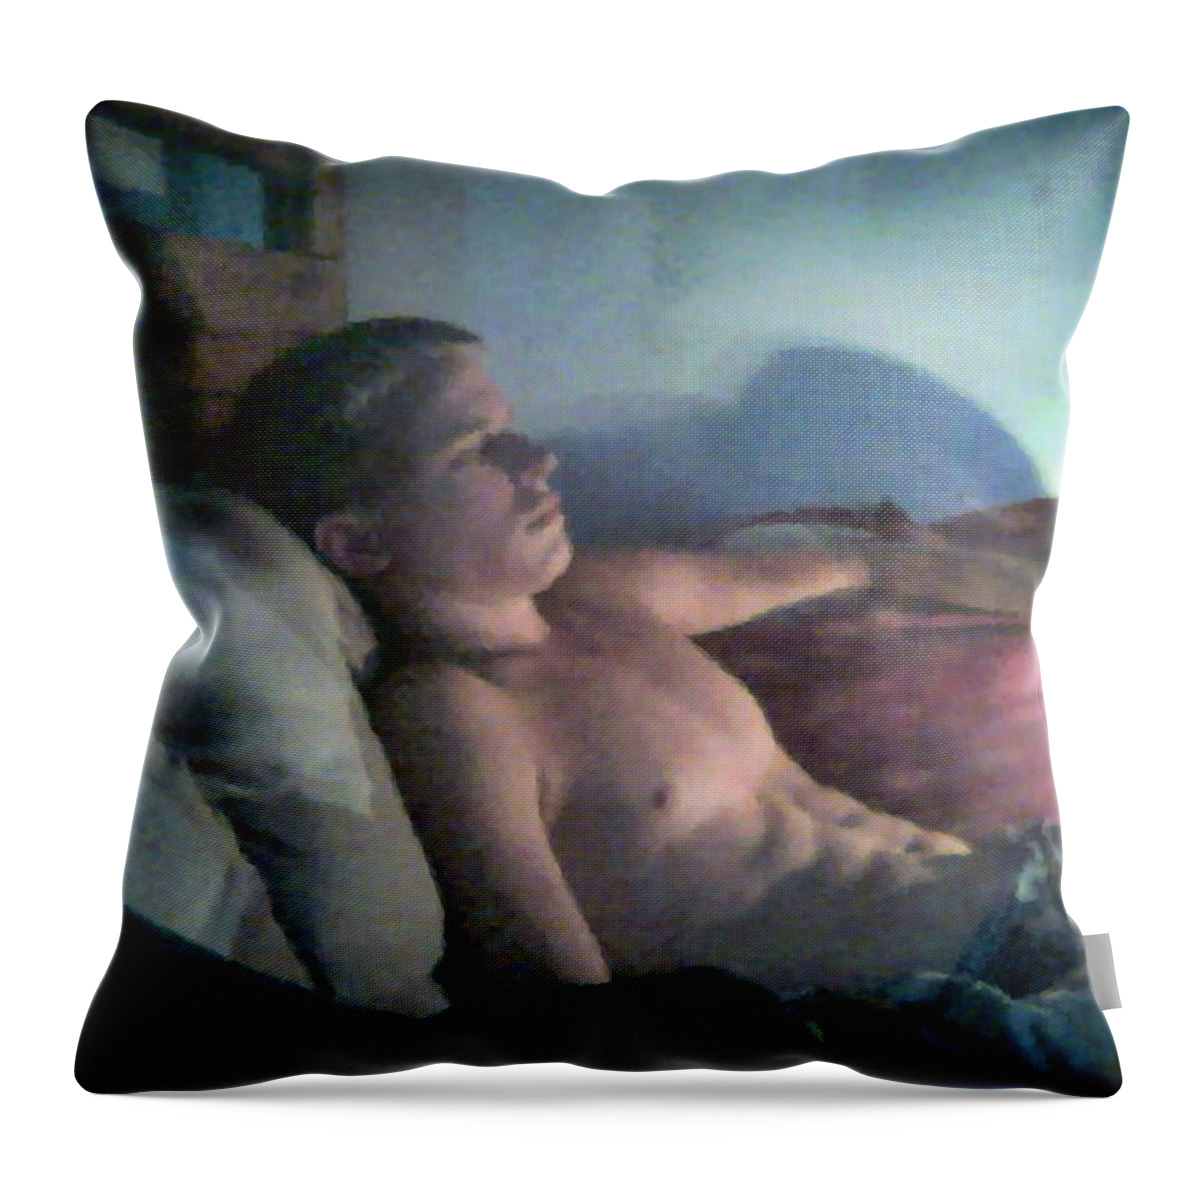 Can't Sleep Throw Pillow featuring the painting Can't Sleep  by Troy Caperton